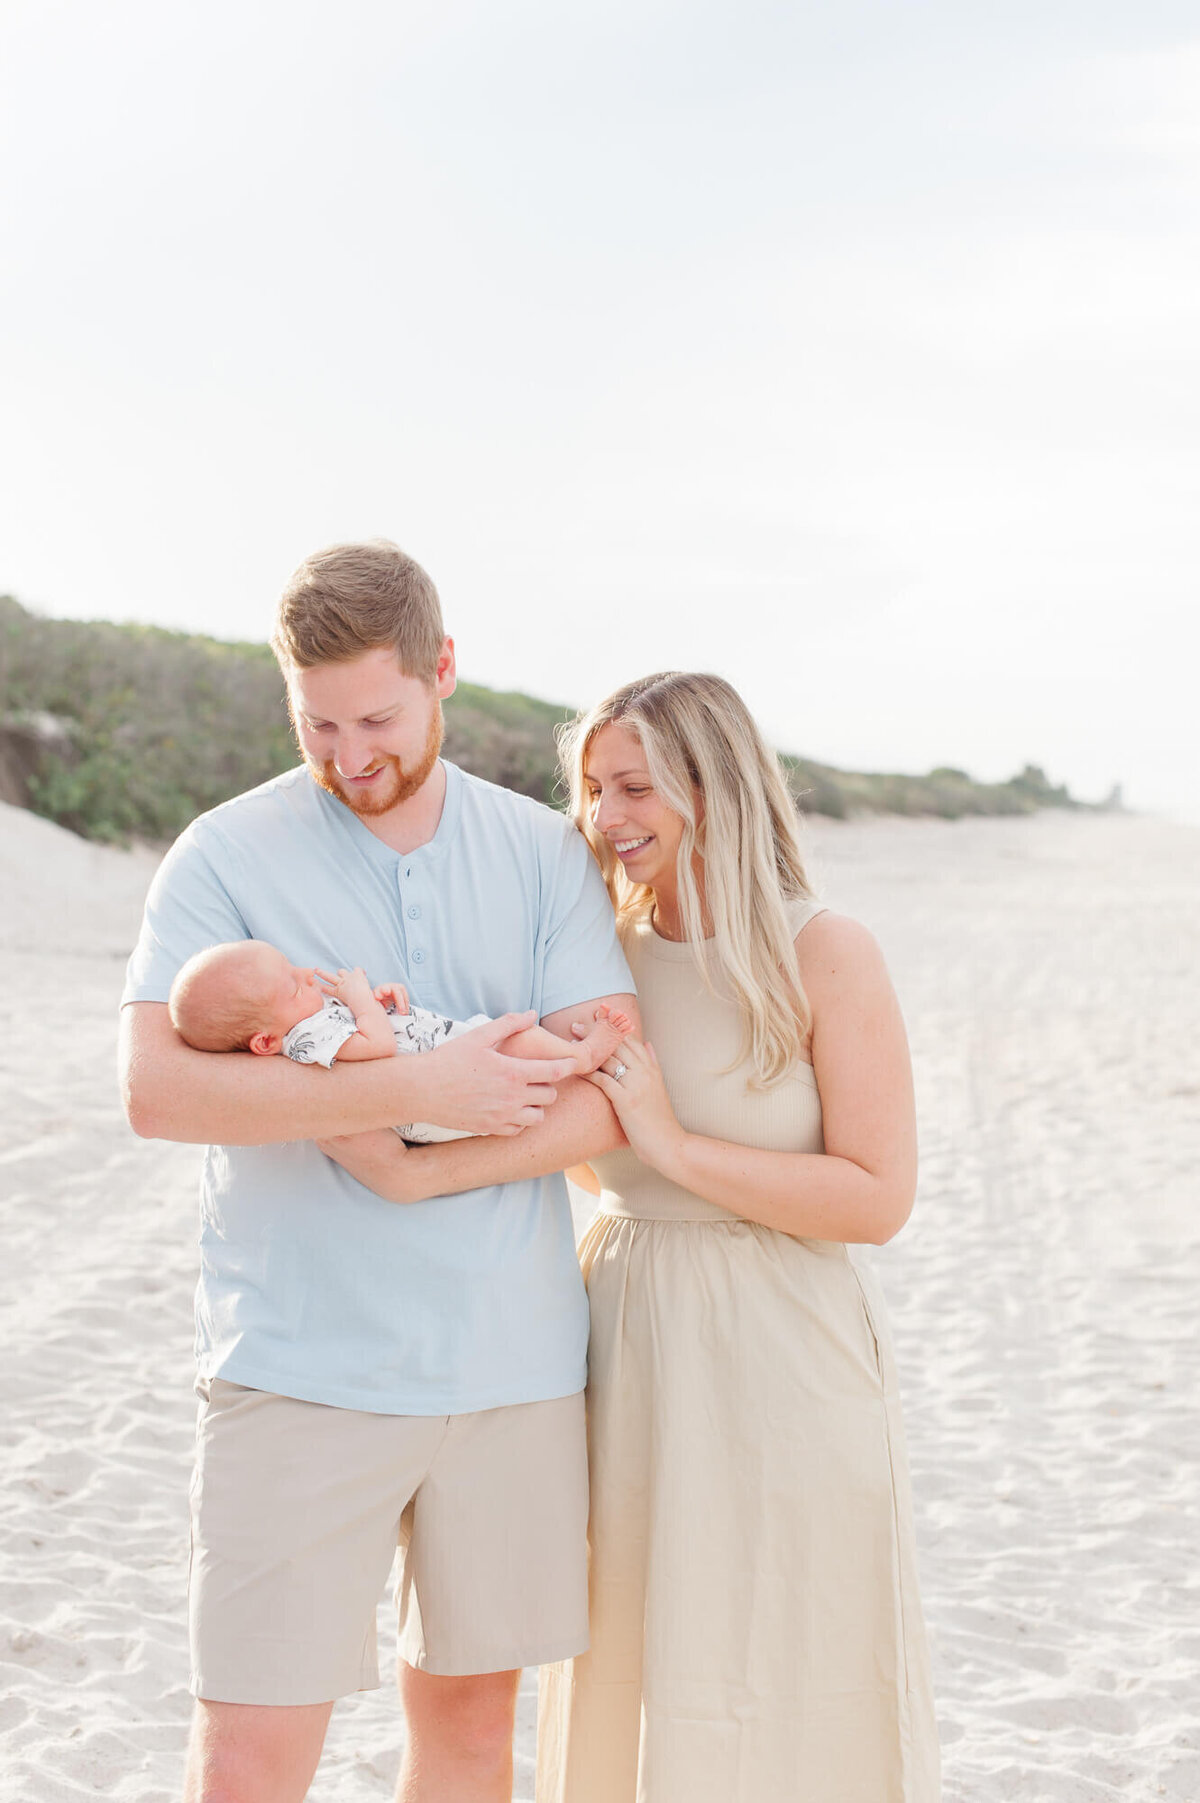 Parents smile down at their newborn son as they stand on the beach during their session with M. Lauren Photography